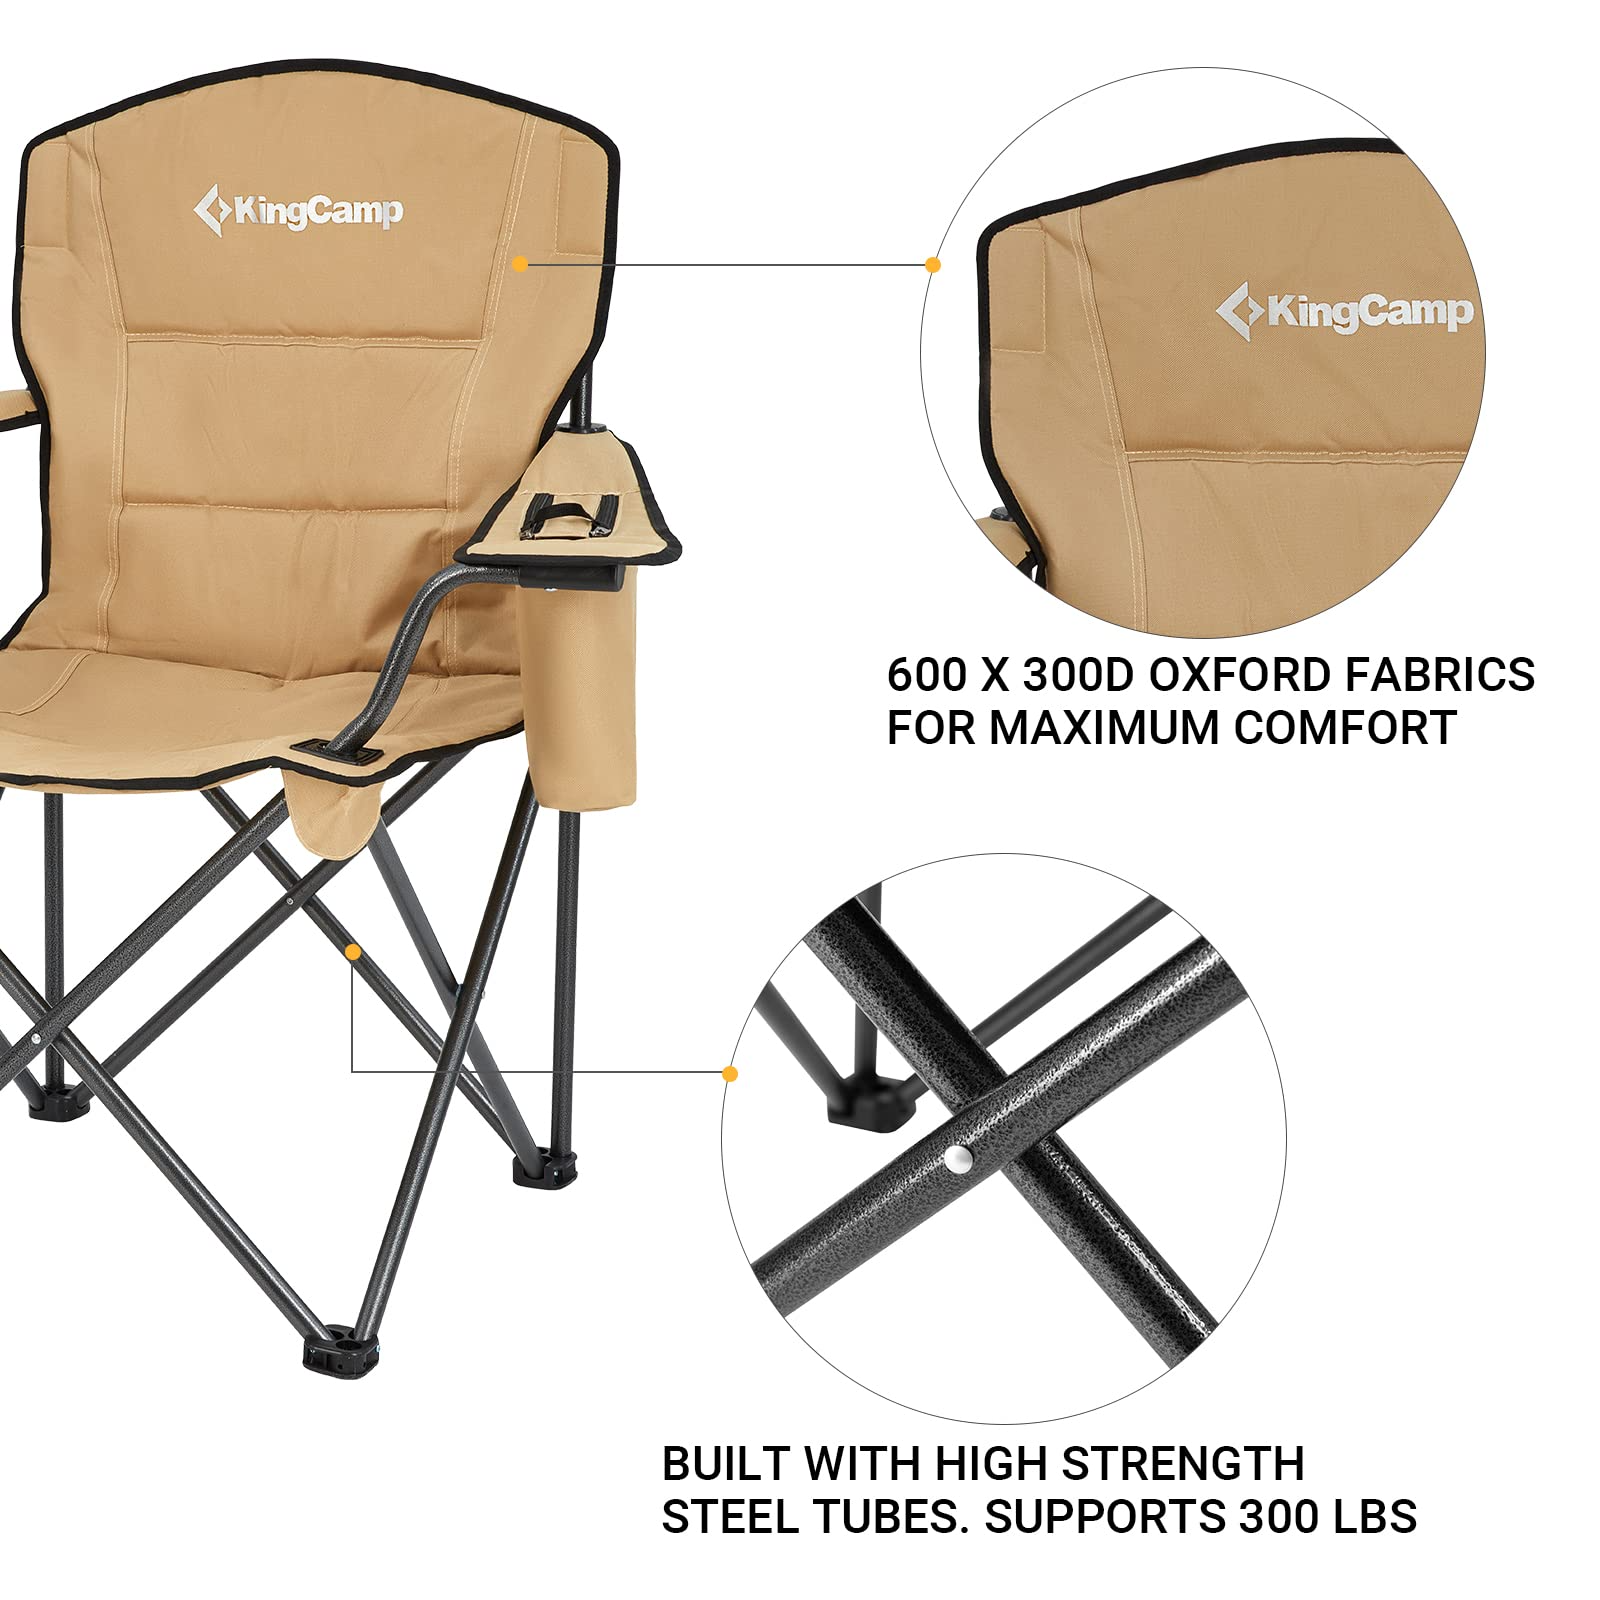 KingCamp Oversized Padded Arm Chair with Cooler